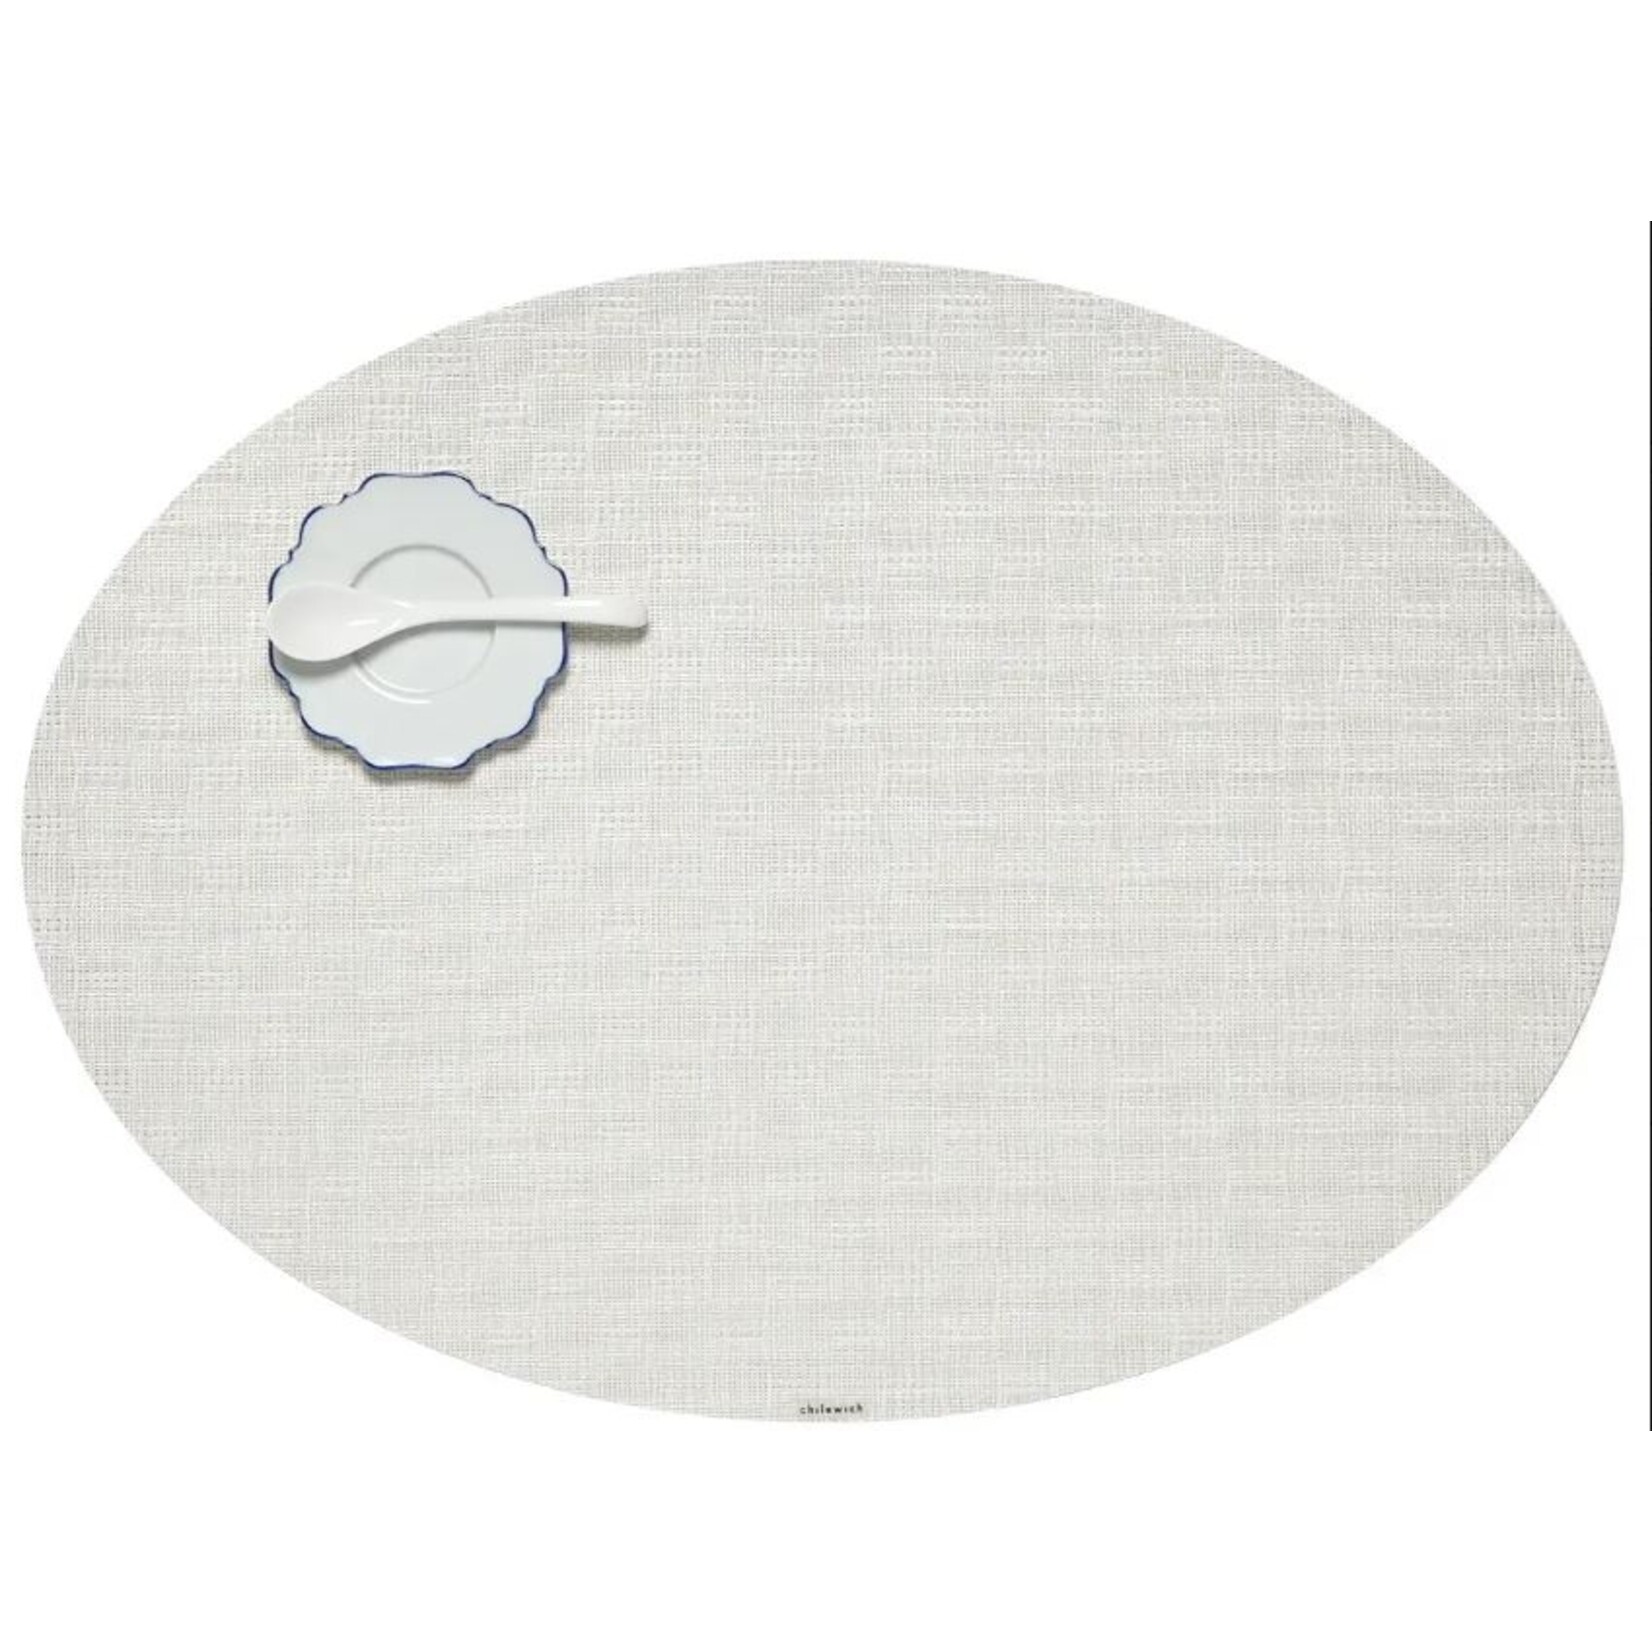 Chilewich White Oval Basketweave Placemat